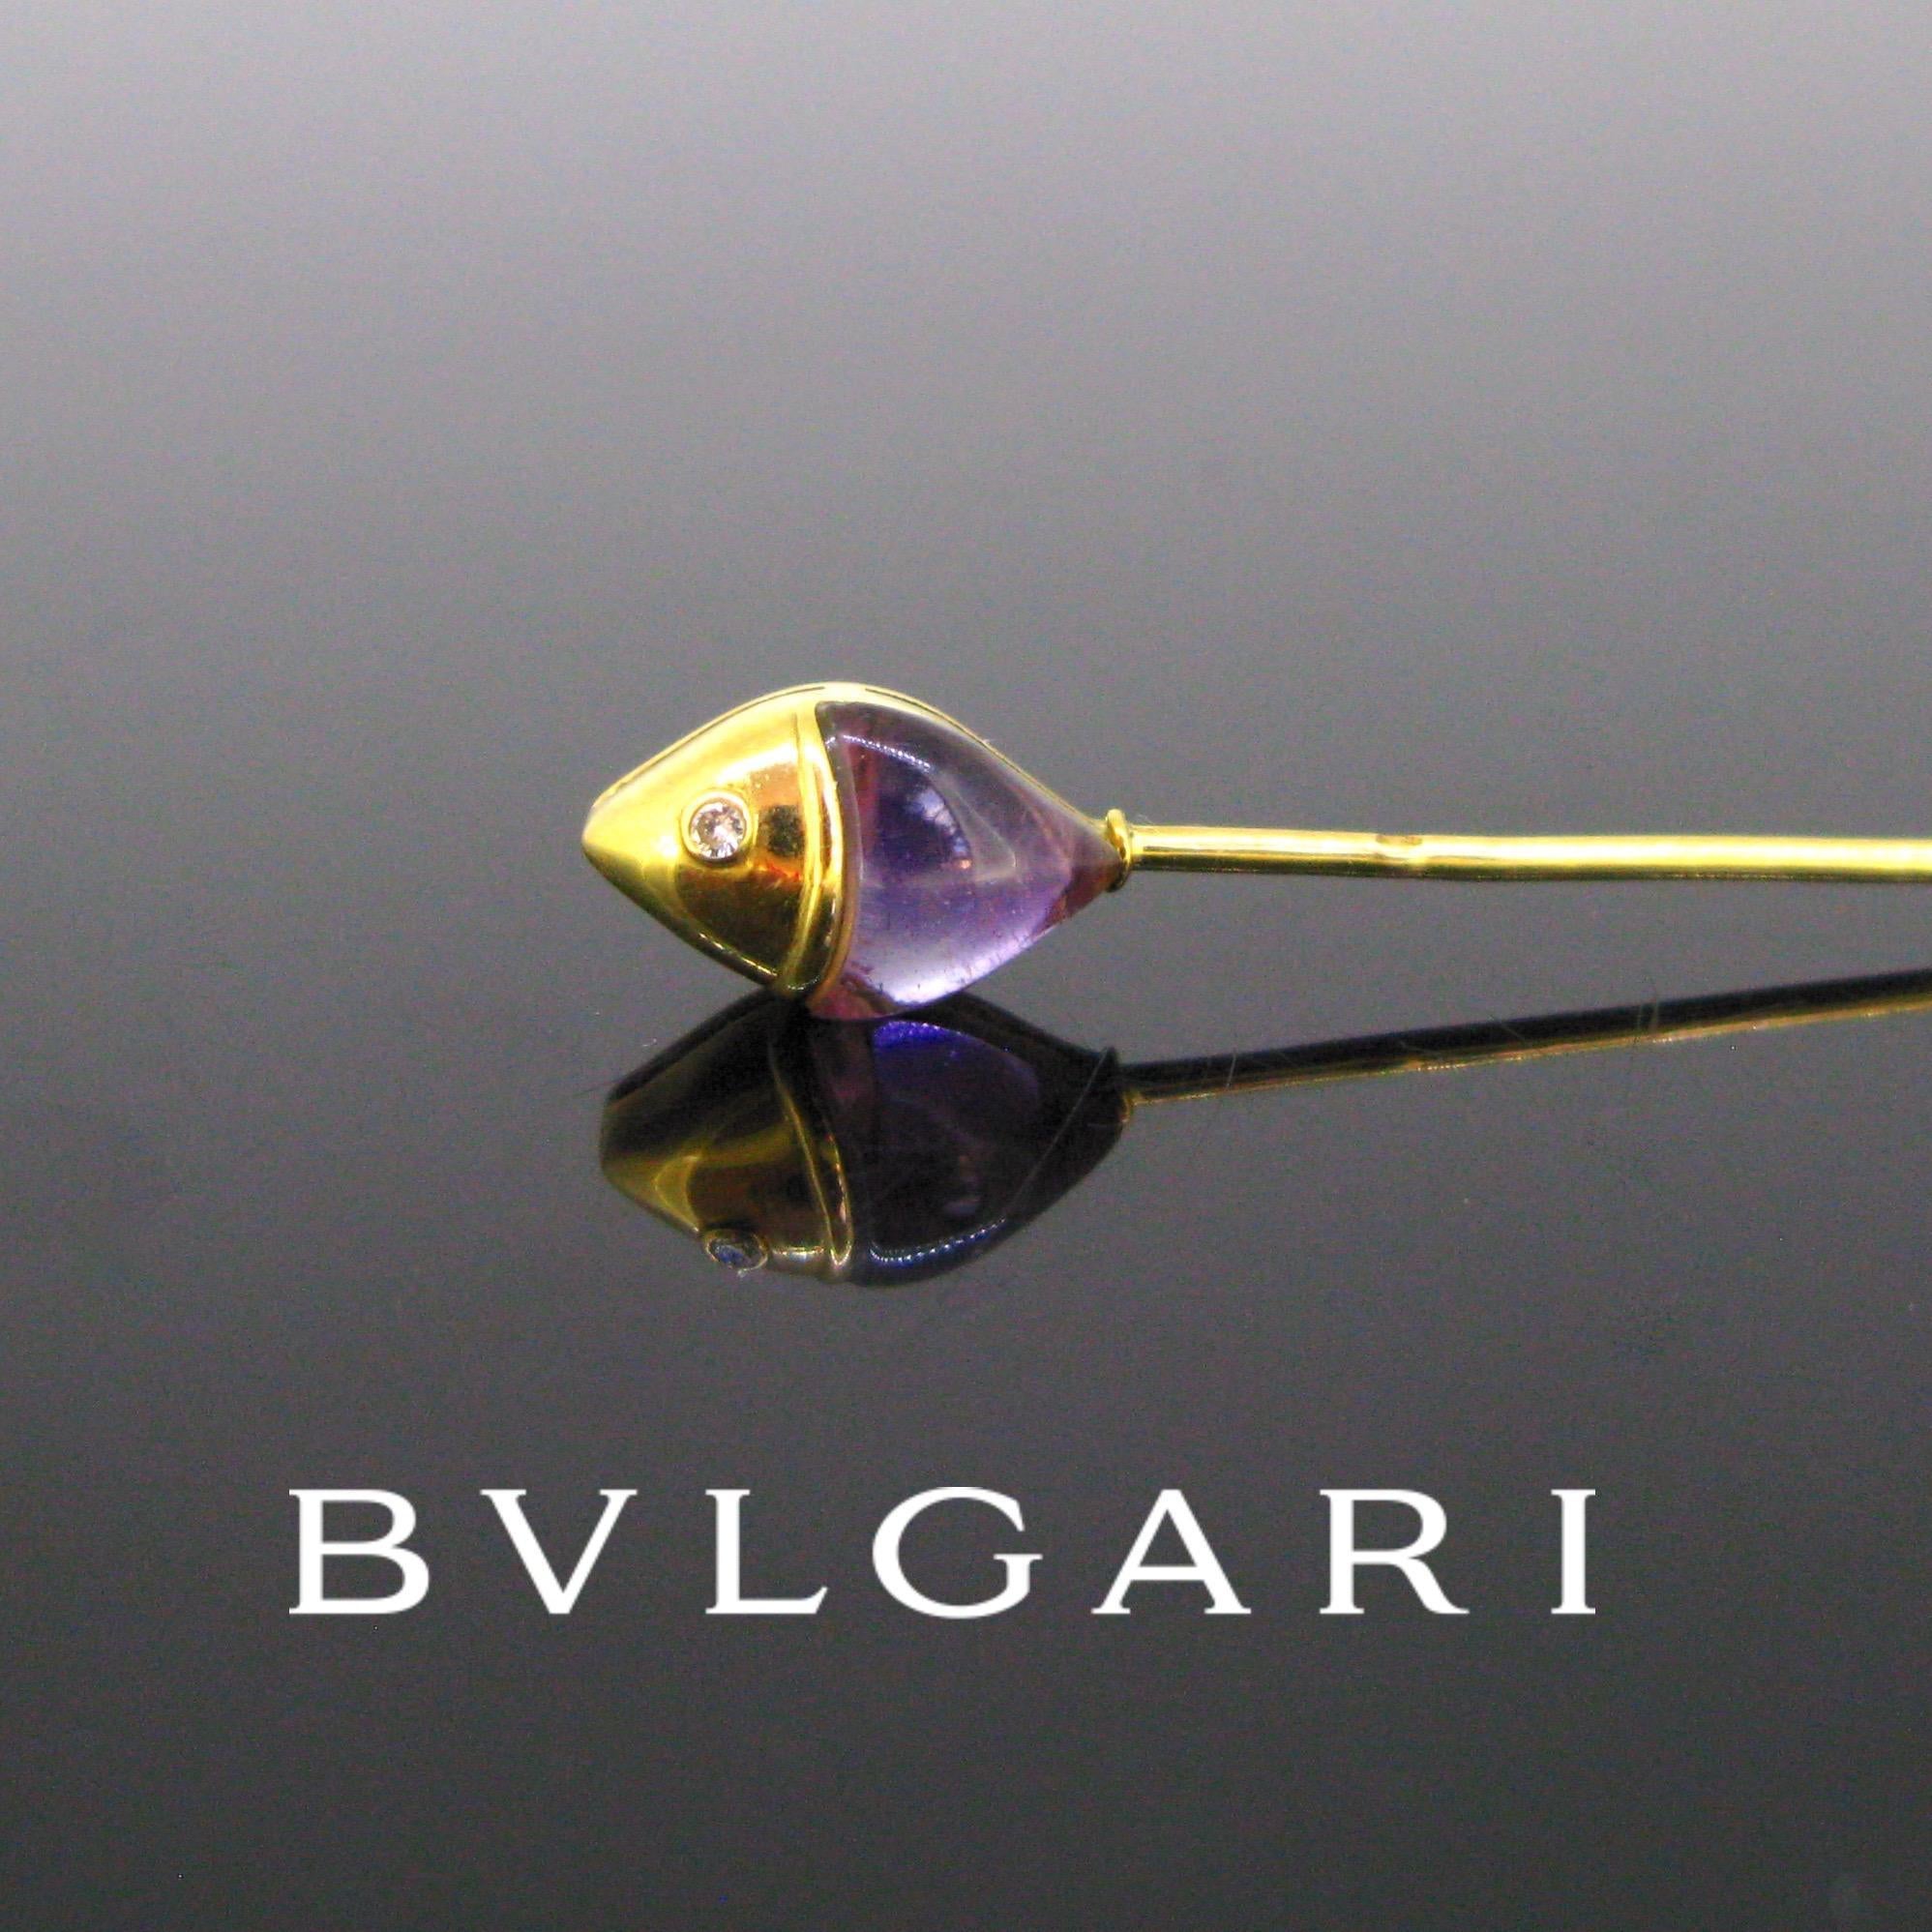 Weight:	2.91gr


Metal:		18kt yellow gold


Stones:	1 Cabochon Amethyst
	1 Round Cut Diamond
	

Condition:	Very Good


Hallmarks:	French, eagle’s head


Signature:	BVLGARI
	

Comments: 		This beautiful stickpin is signed BVLGARI. It features a fish